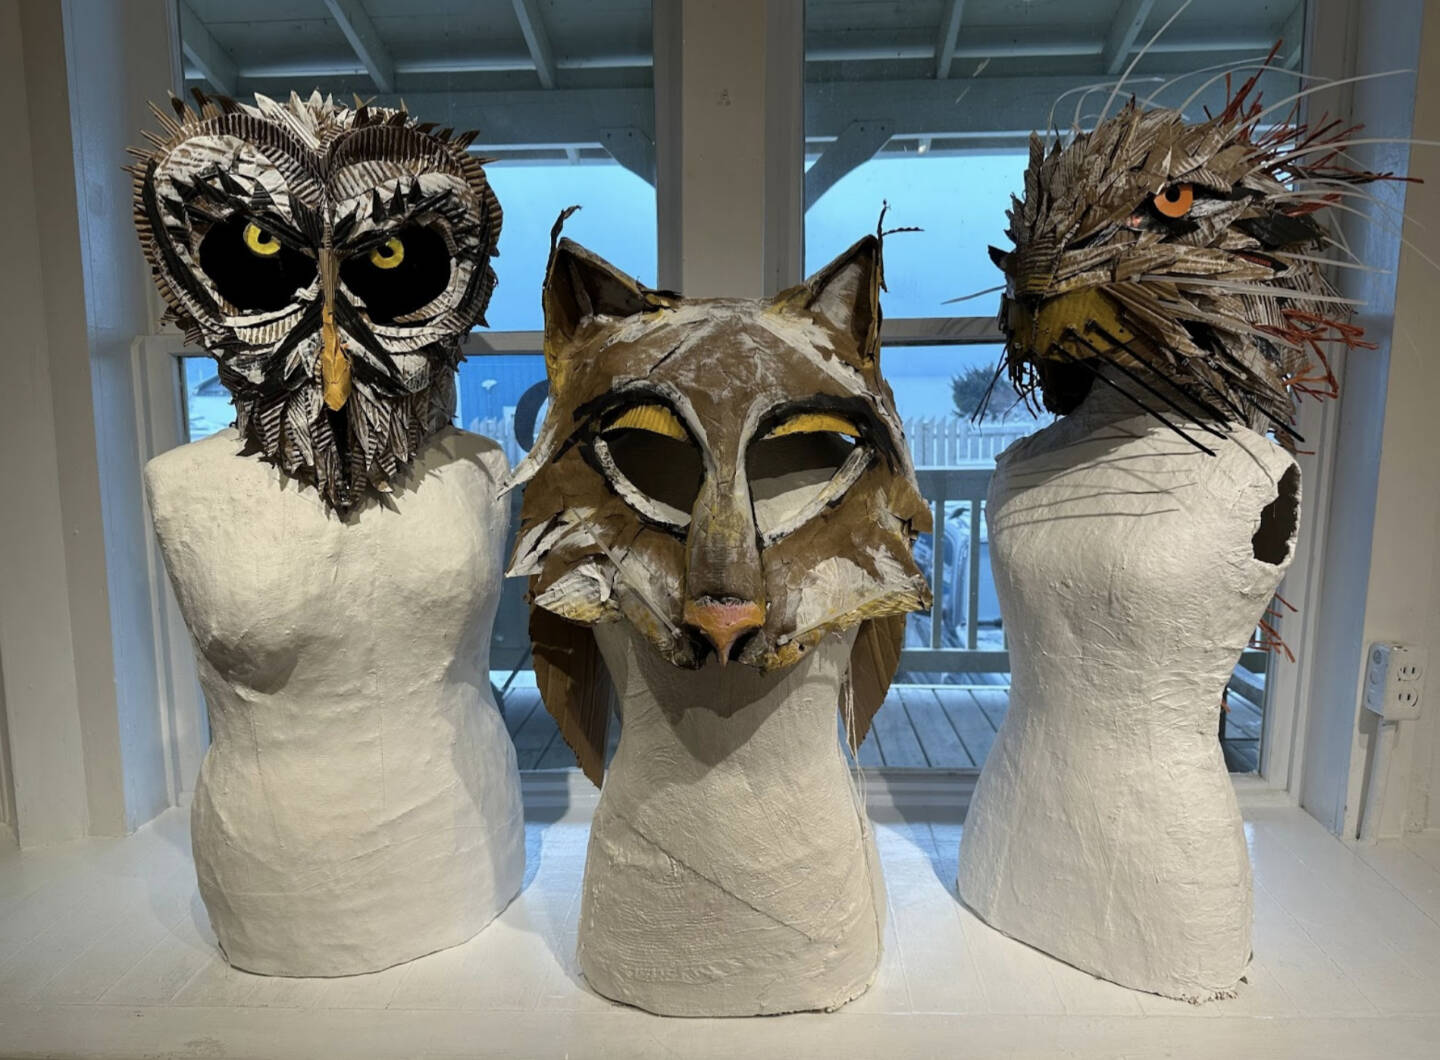 Masks like these are among the wearable and walkable items community members can create at Bunnell’s Makers’ Space open studios in January. Photo provided by Bunnell Street Arts Center